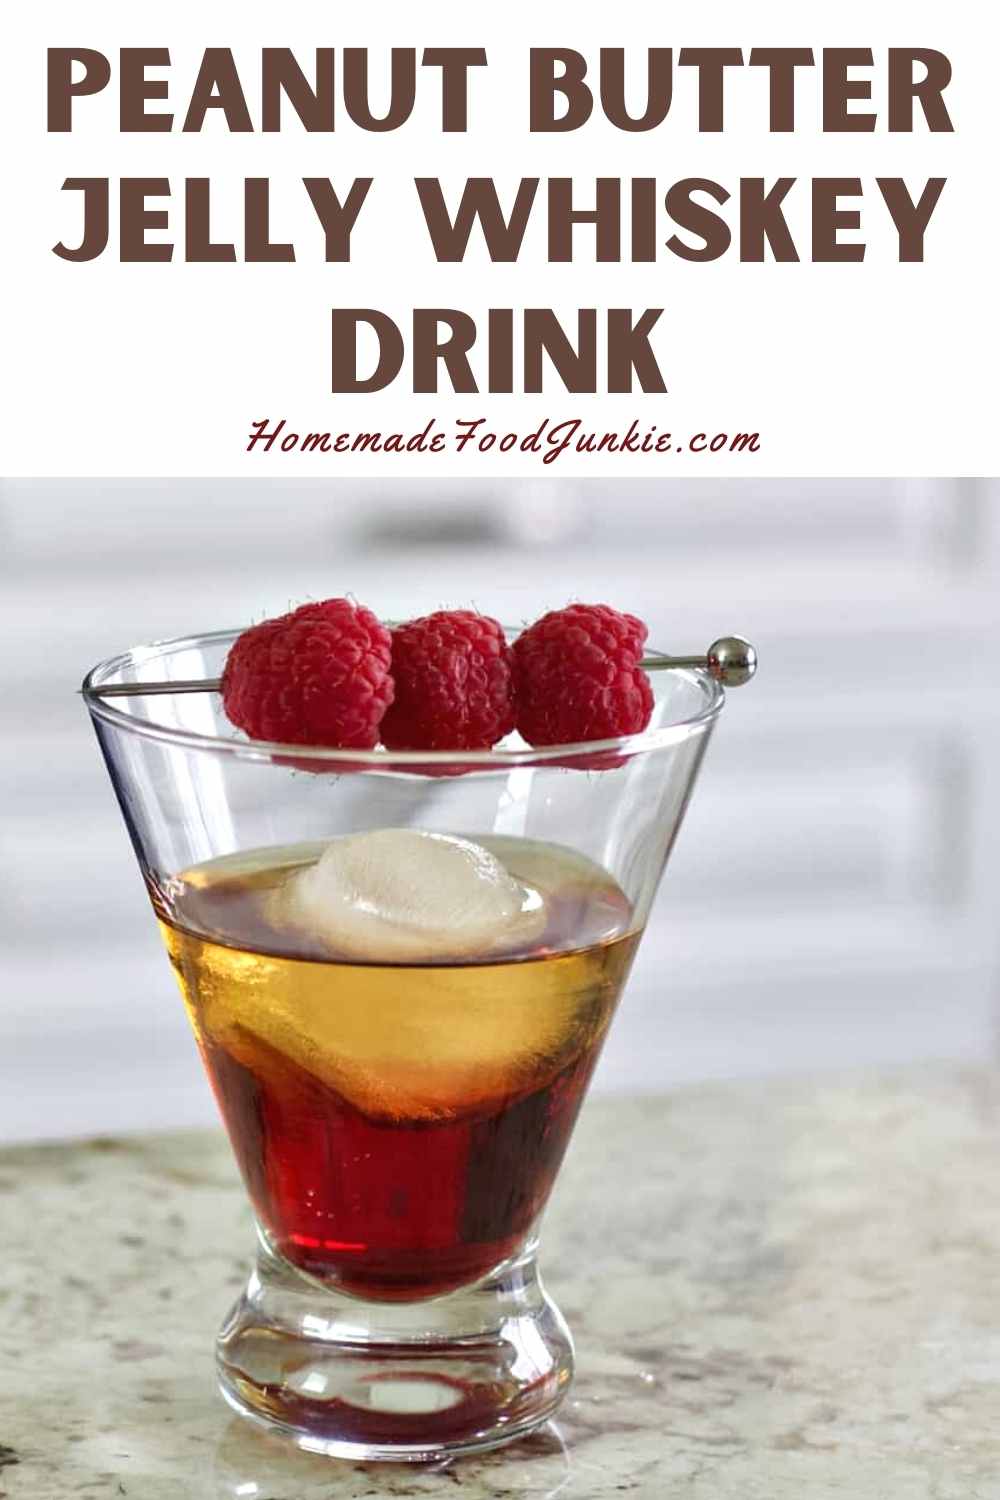 Peanut Butter Jelly Whiskey Drink-Pin Image